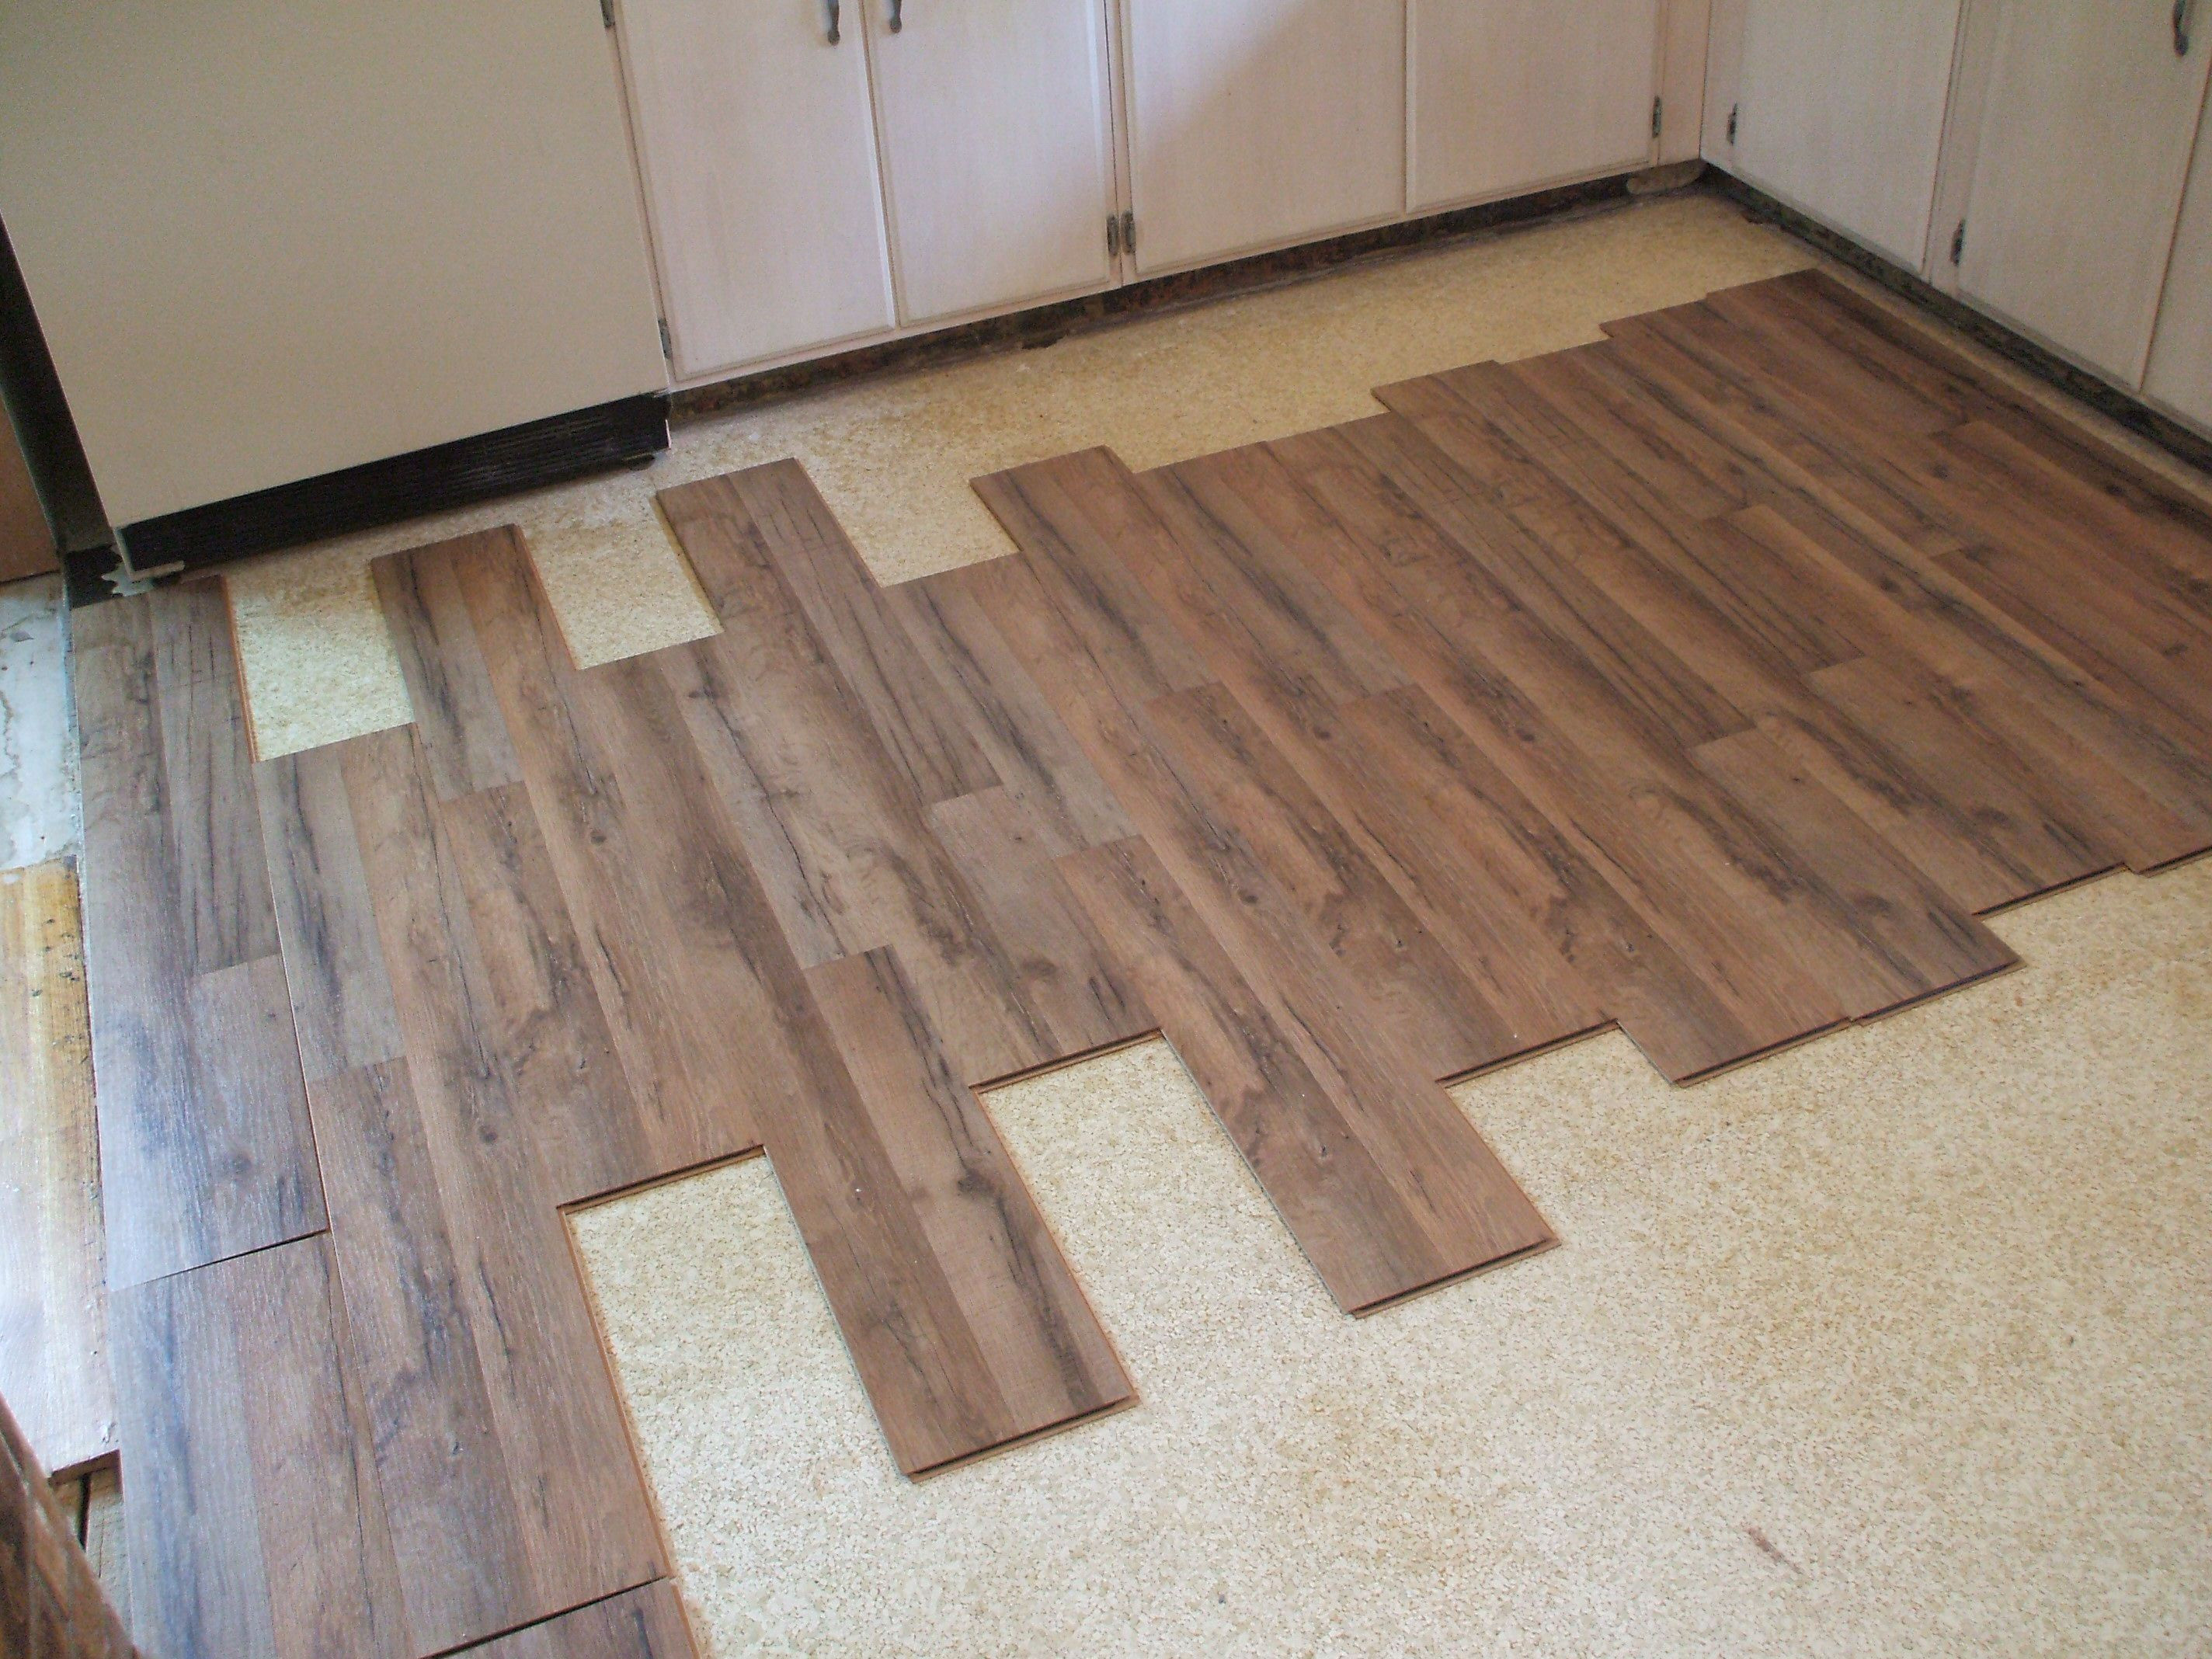 11 Trendy Gluing solid Hardwood Floors to Concrete 2024 free download gluing solid hardwood floors to concrete of laminate flooring installation made easy with regard to installing laminate eyeballing layout 56a49d075f9b58b7d0d7d693 jpg